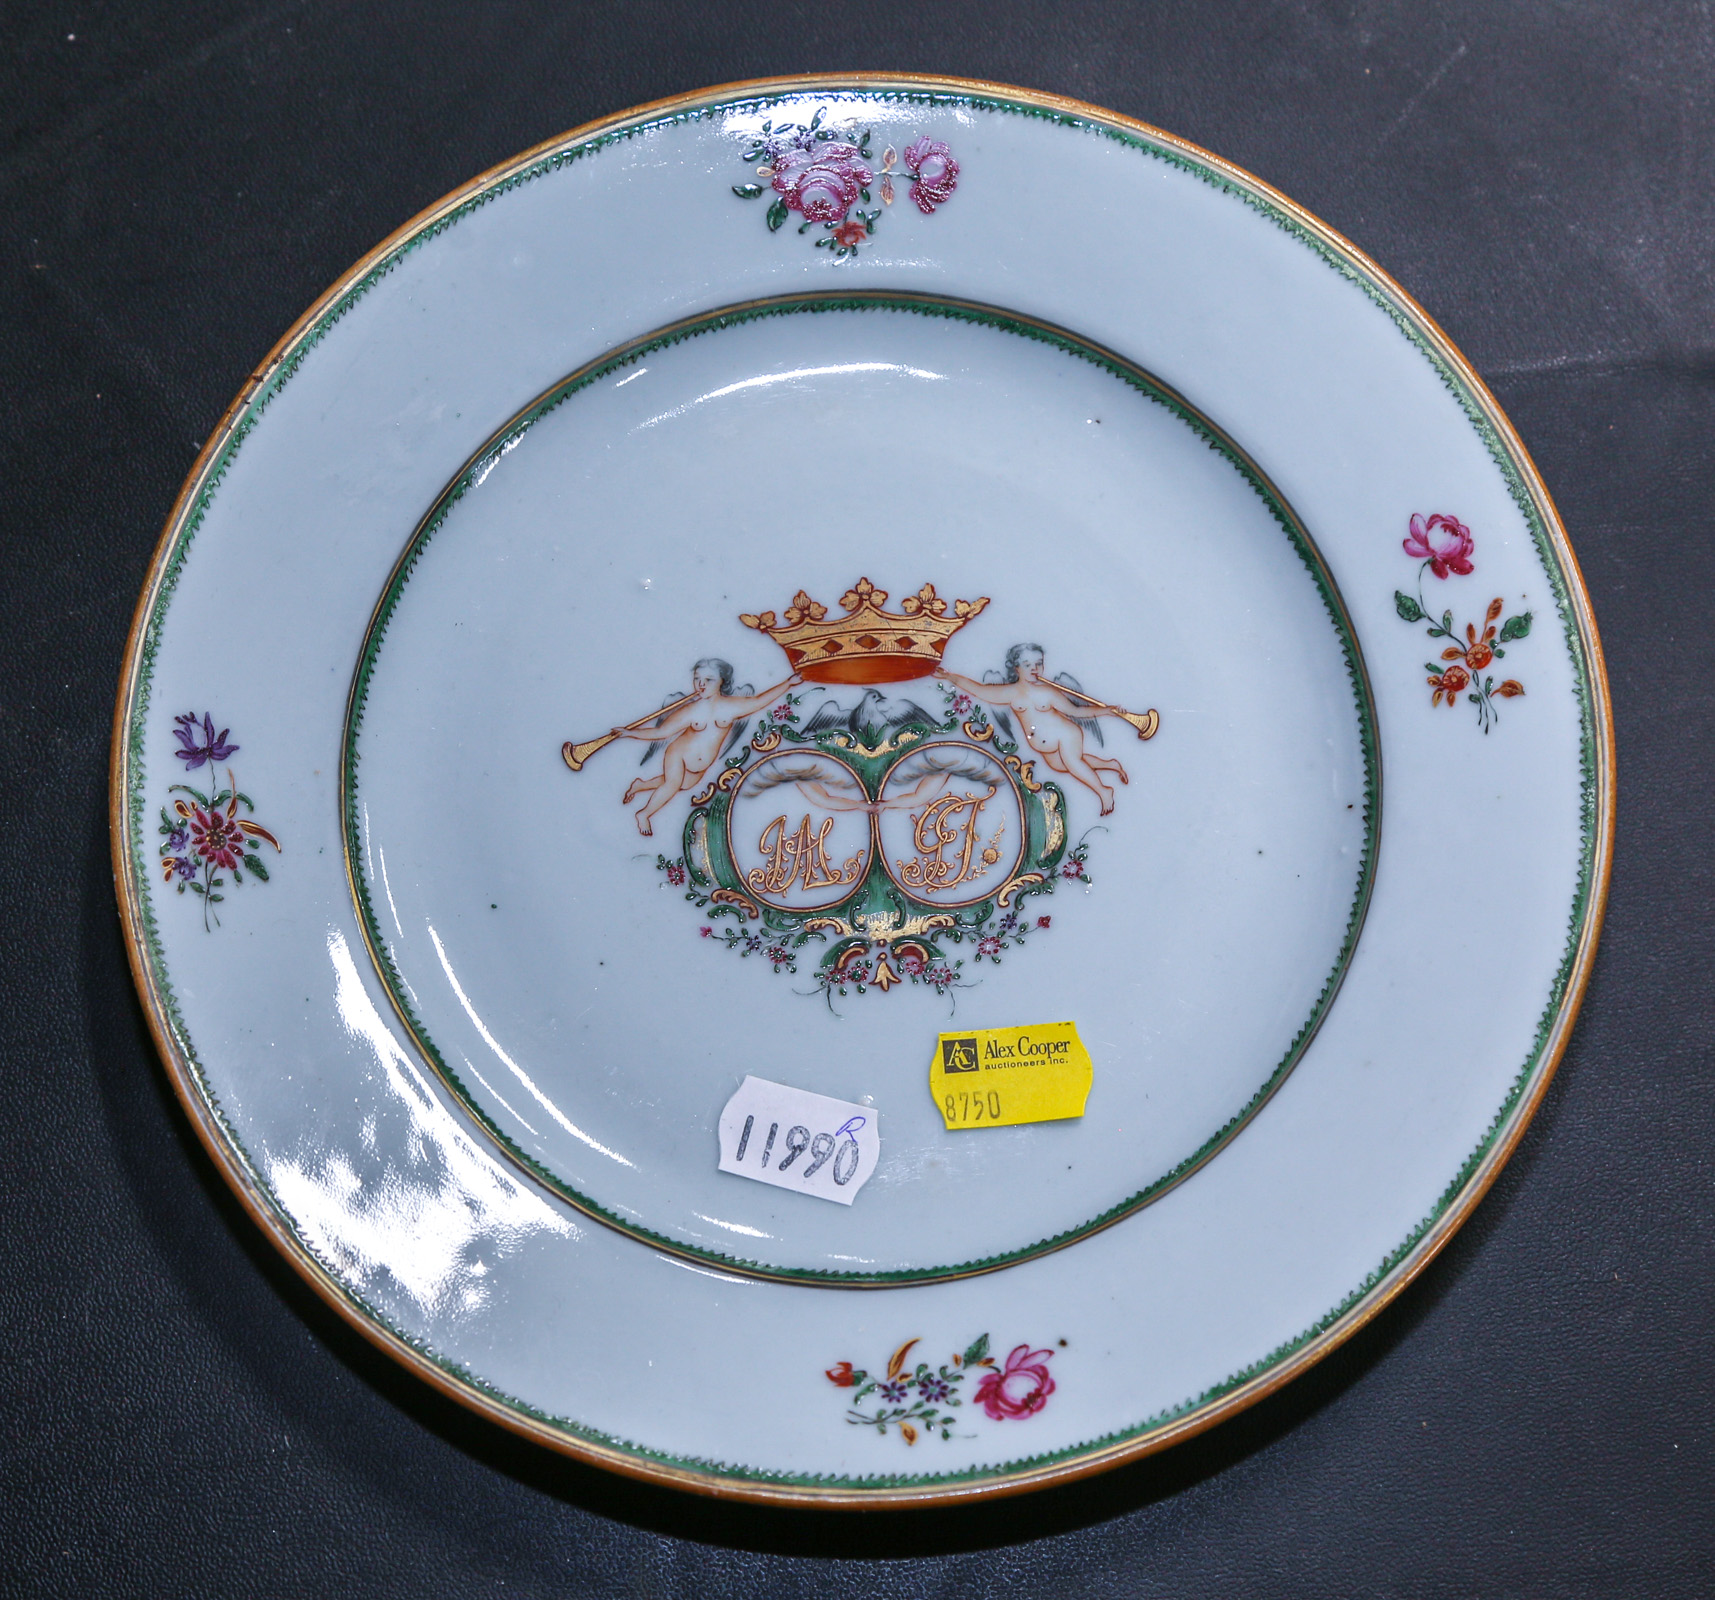 CHINESE EXPORT WARE FAMILLE ROSE 3cb458